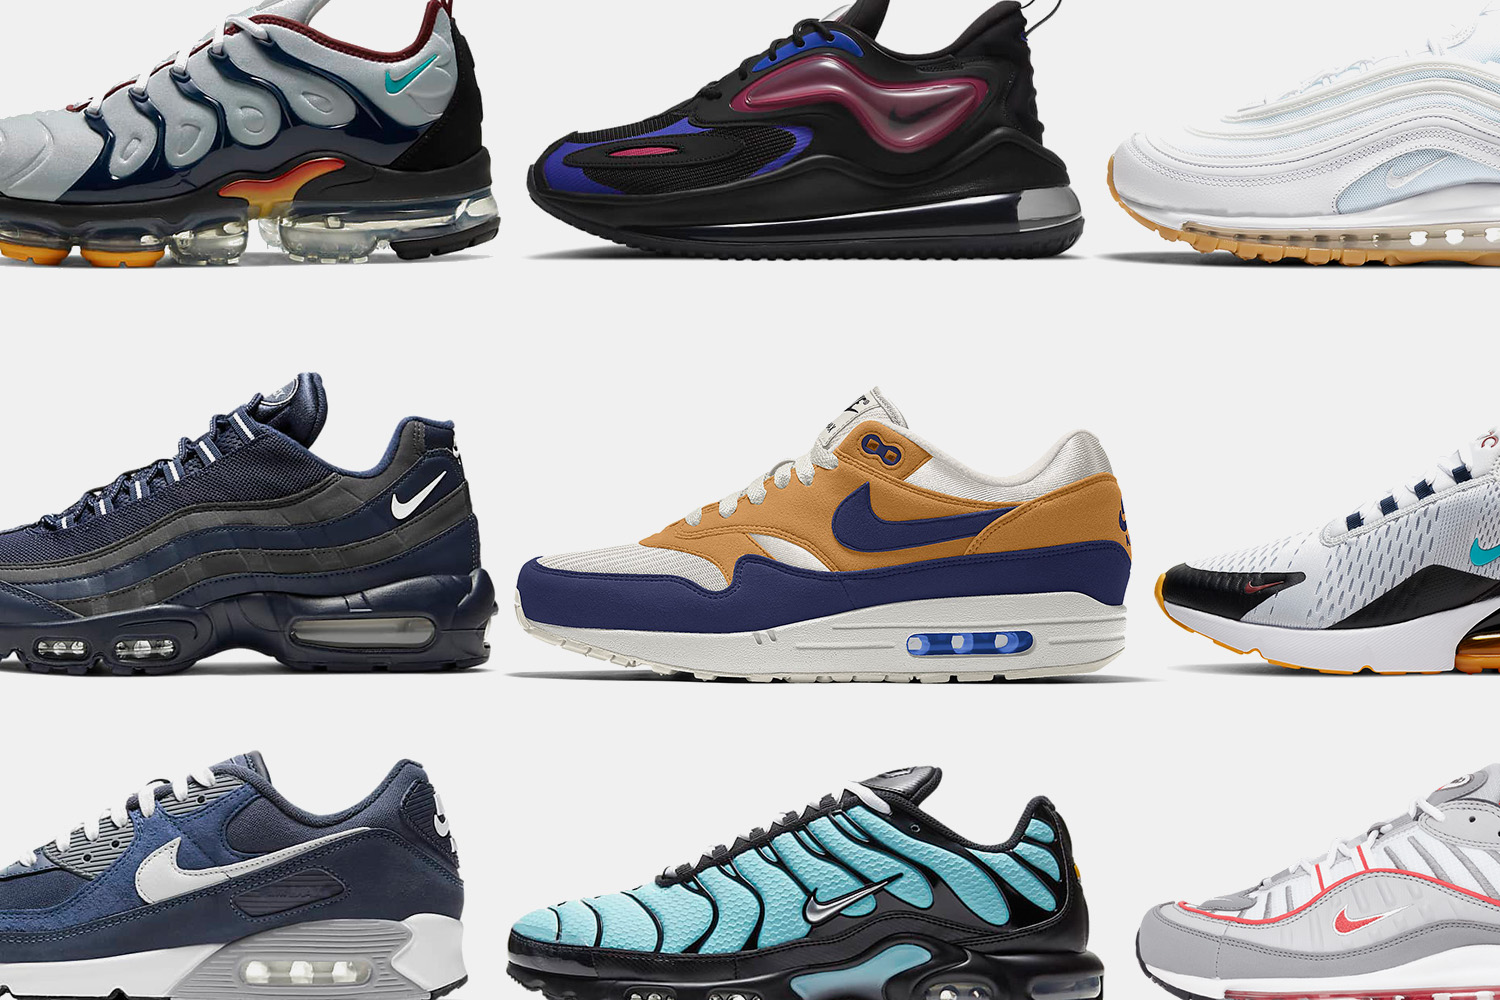 Which Nike Air Max Sneaker Model Is Right for You? - InsideHook